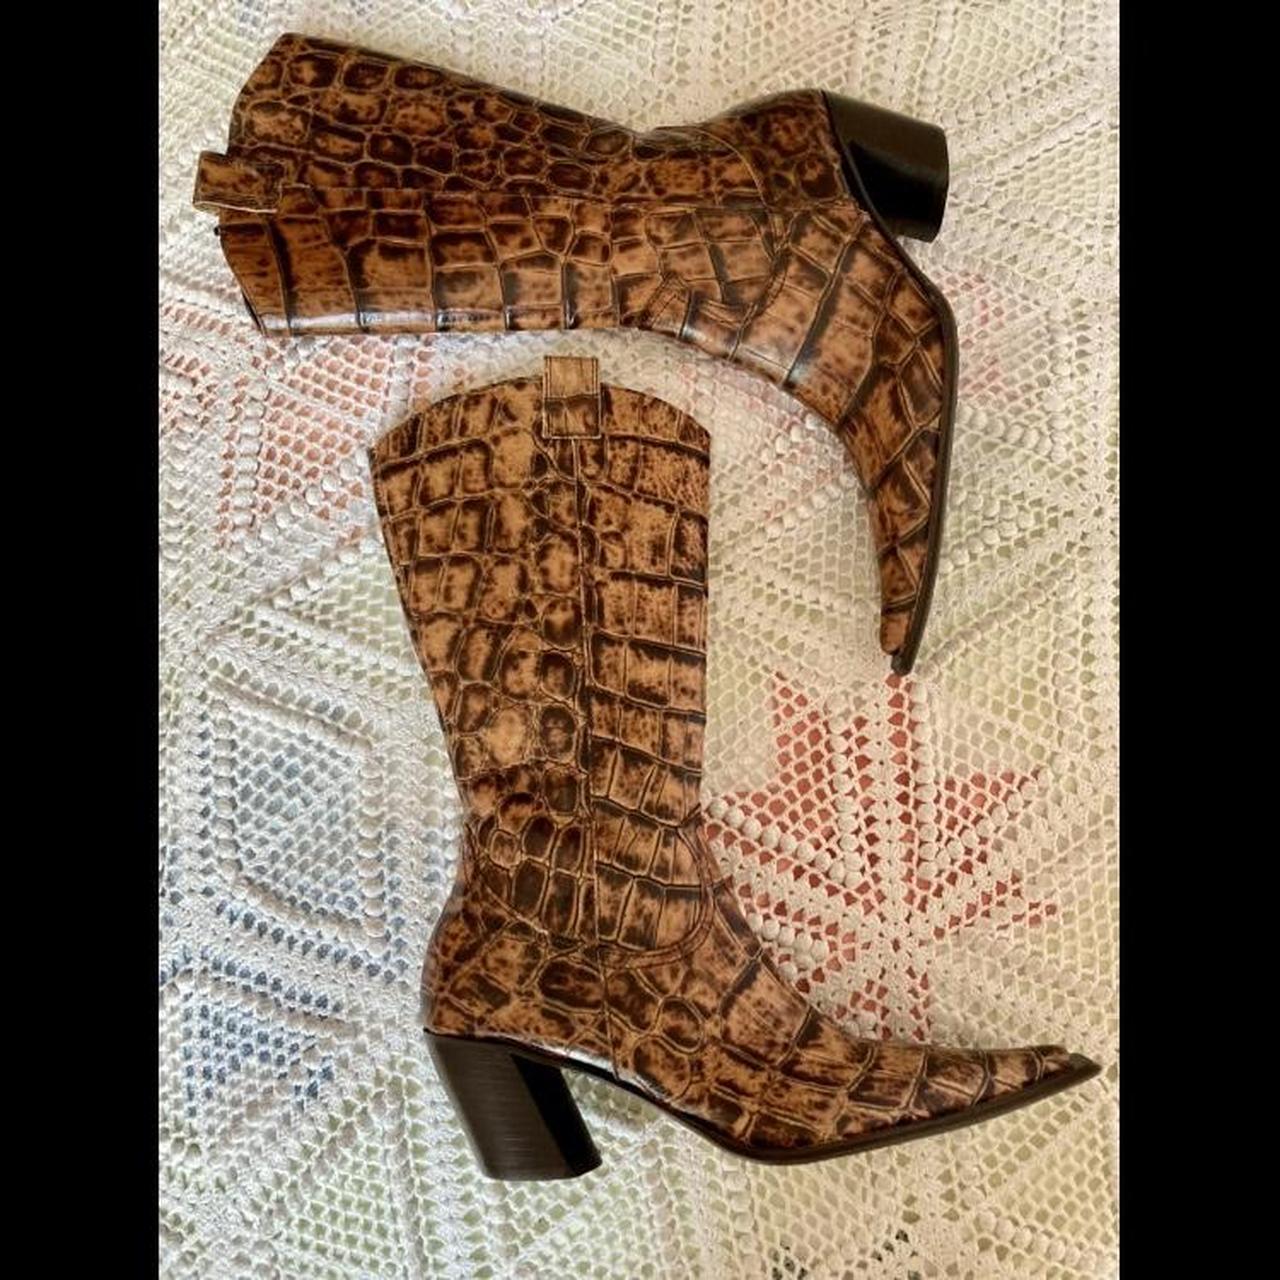 Product Image 3 - Dream boots 🥲🤠
Extremely pointy leather